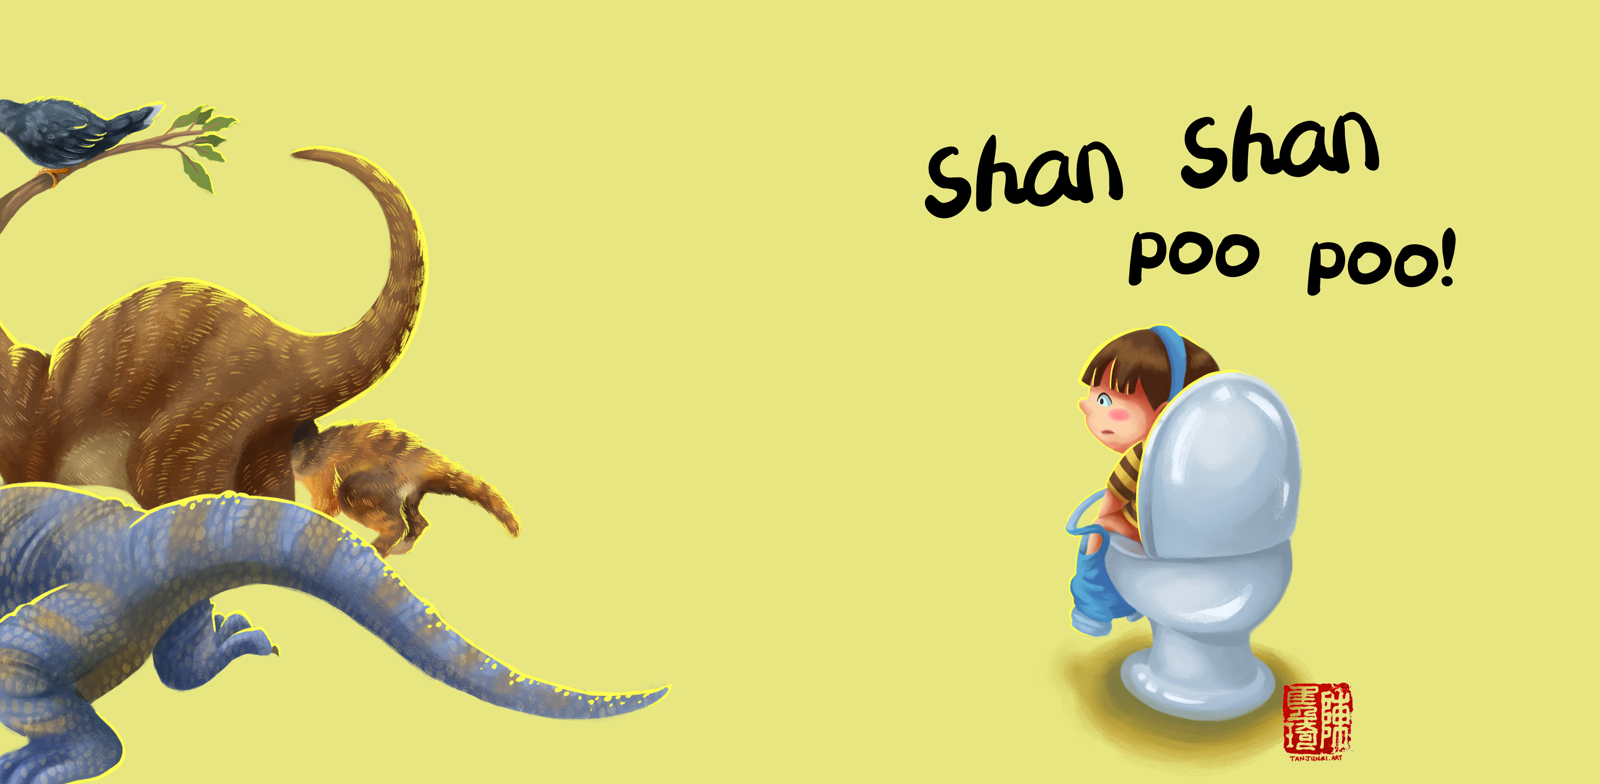 Book cover design (english version) for 'Shan Shan Needs to Poo Poo'. The front cover shows a backview of Shan Shan sitting on the toilet bowl pooping as she looks to the left. On the back cover she sees the backsides of her animal friends, tails lifted and butts raised, all standing ready to poo.